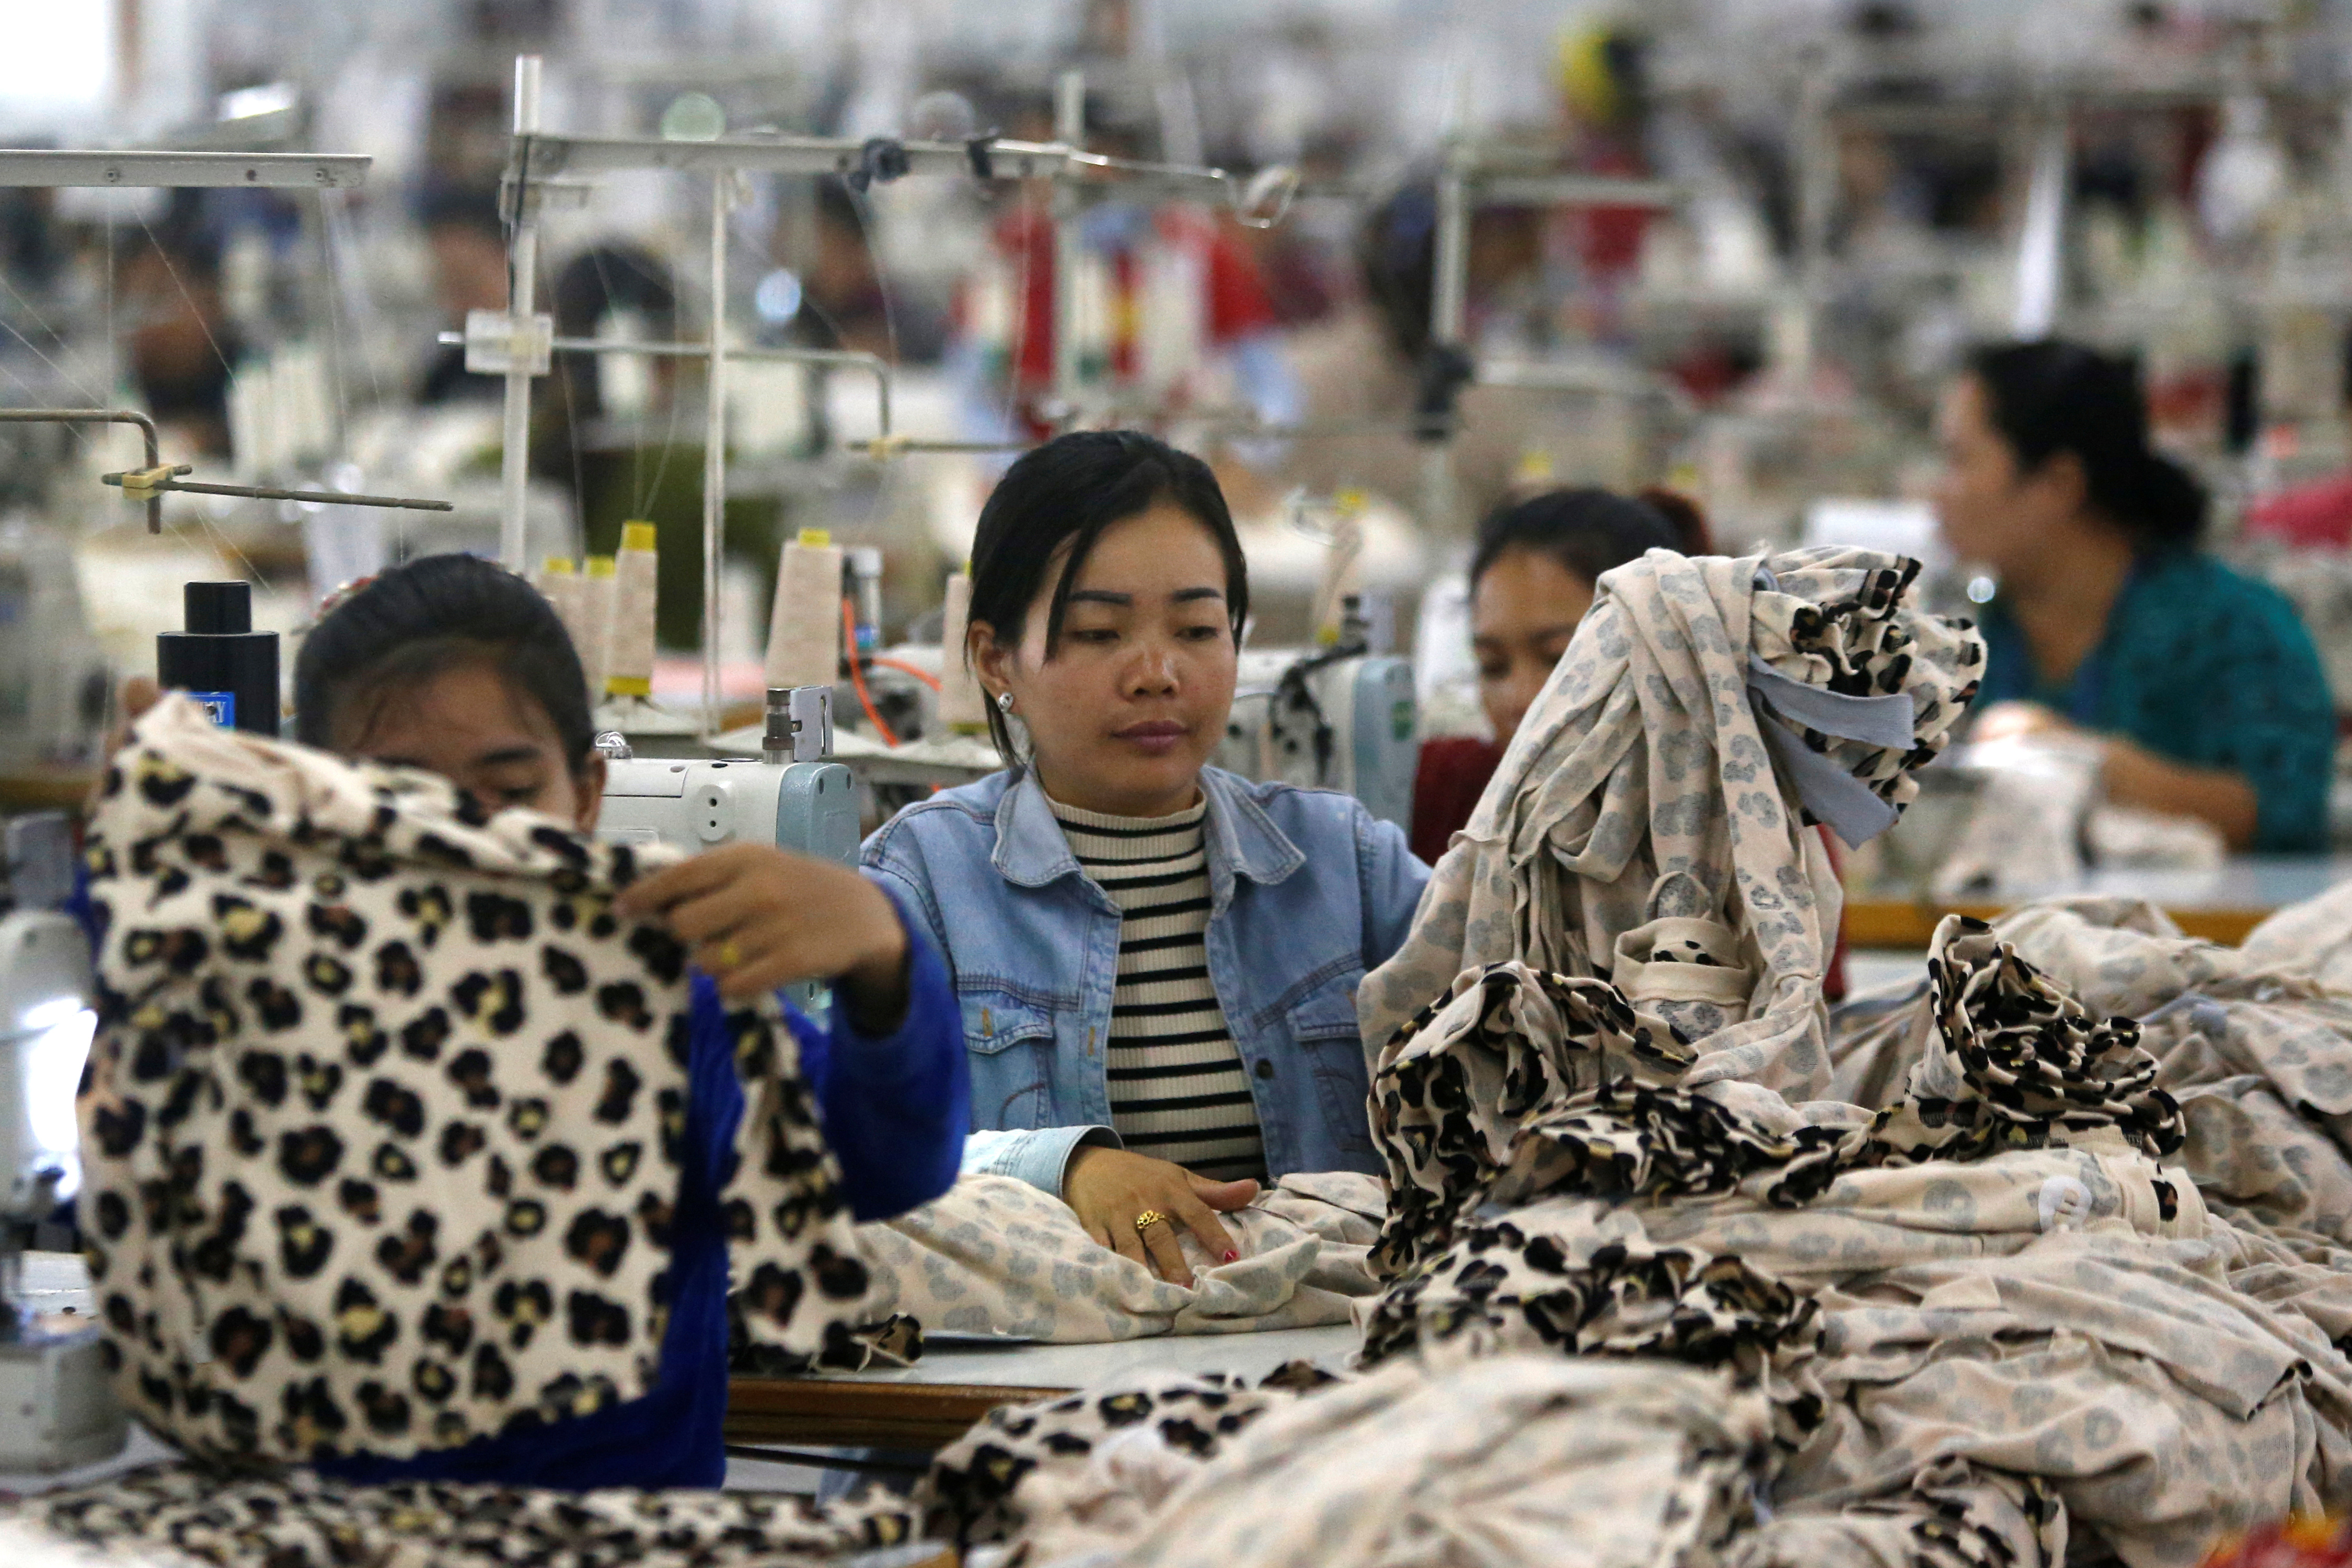 Employees work at a factory supplier of the H&M brand in Kandal province, Cambodia, in 2018.